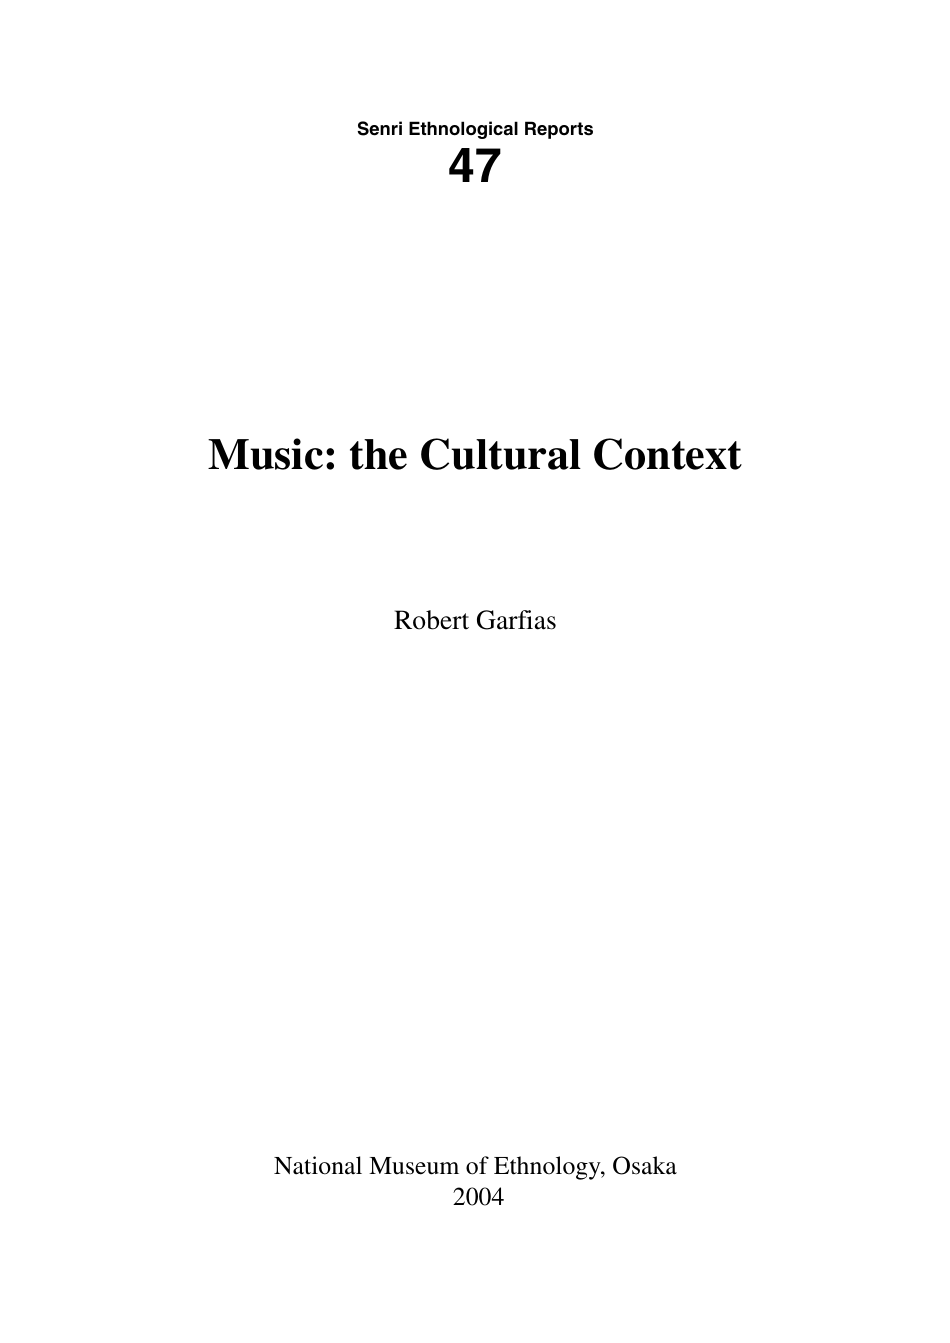 the Cultural Context - Senri Ethnological Reports 47", cover image